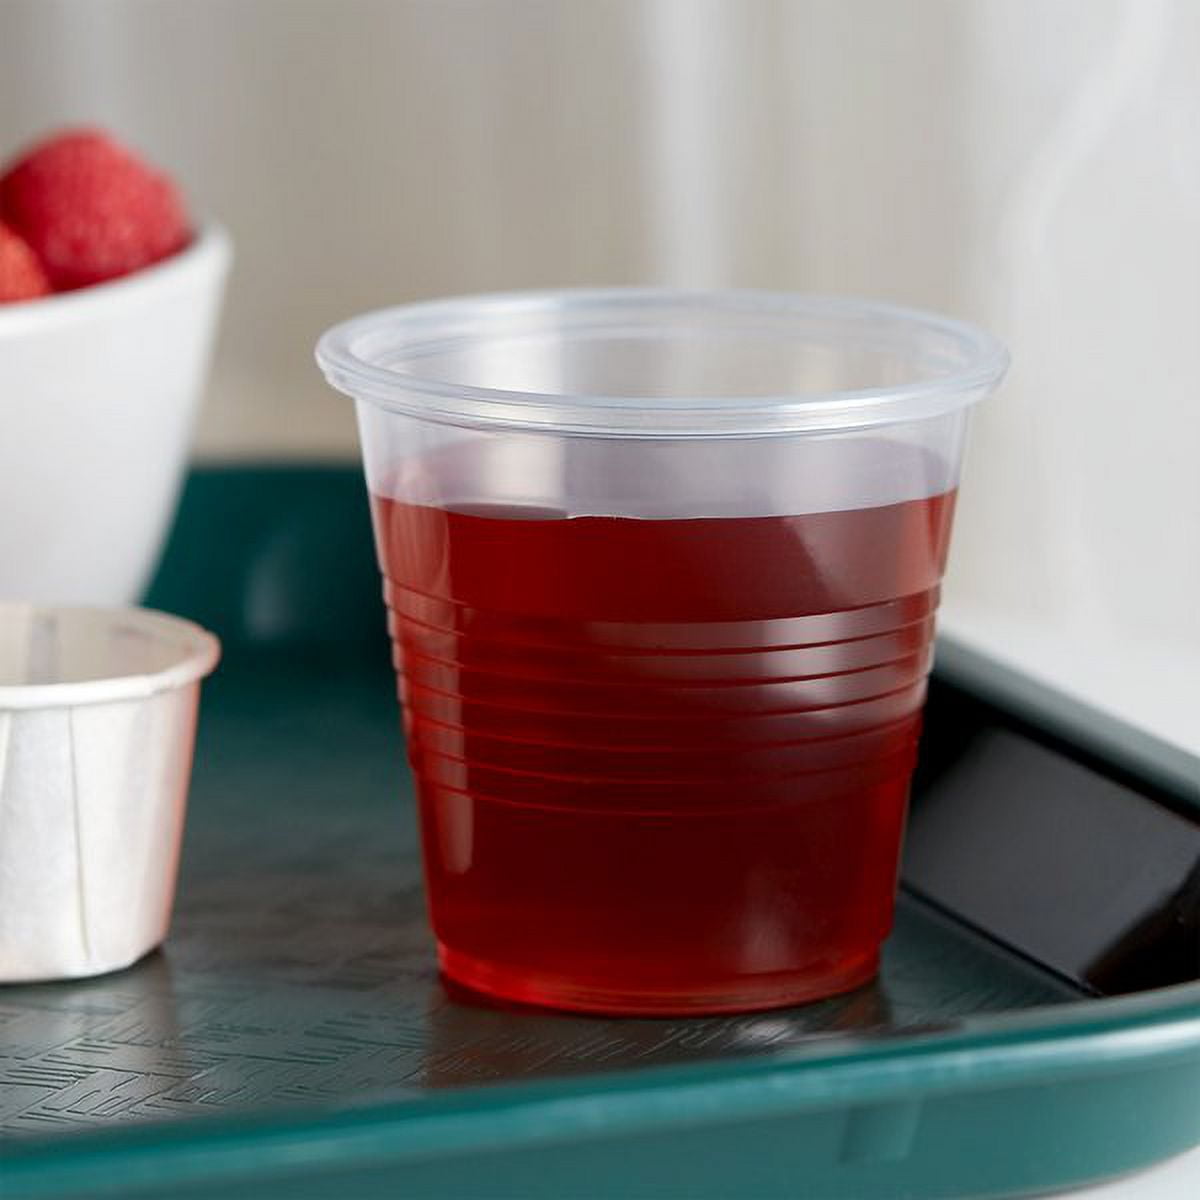 Choice 9 oz. Translucent Thin Wall Plastic Cold Cup - 2500/Case